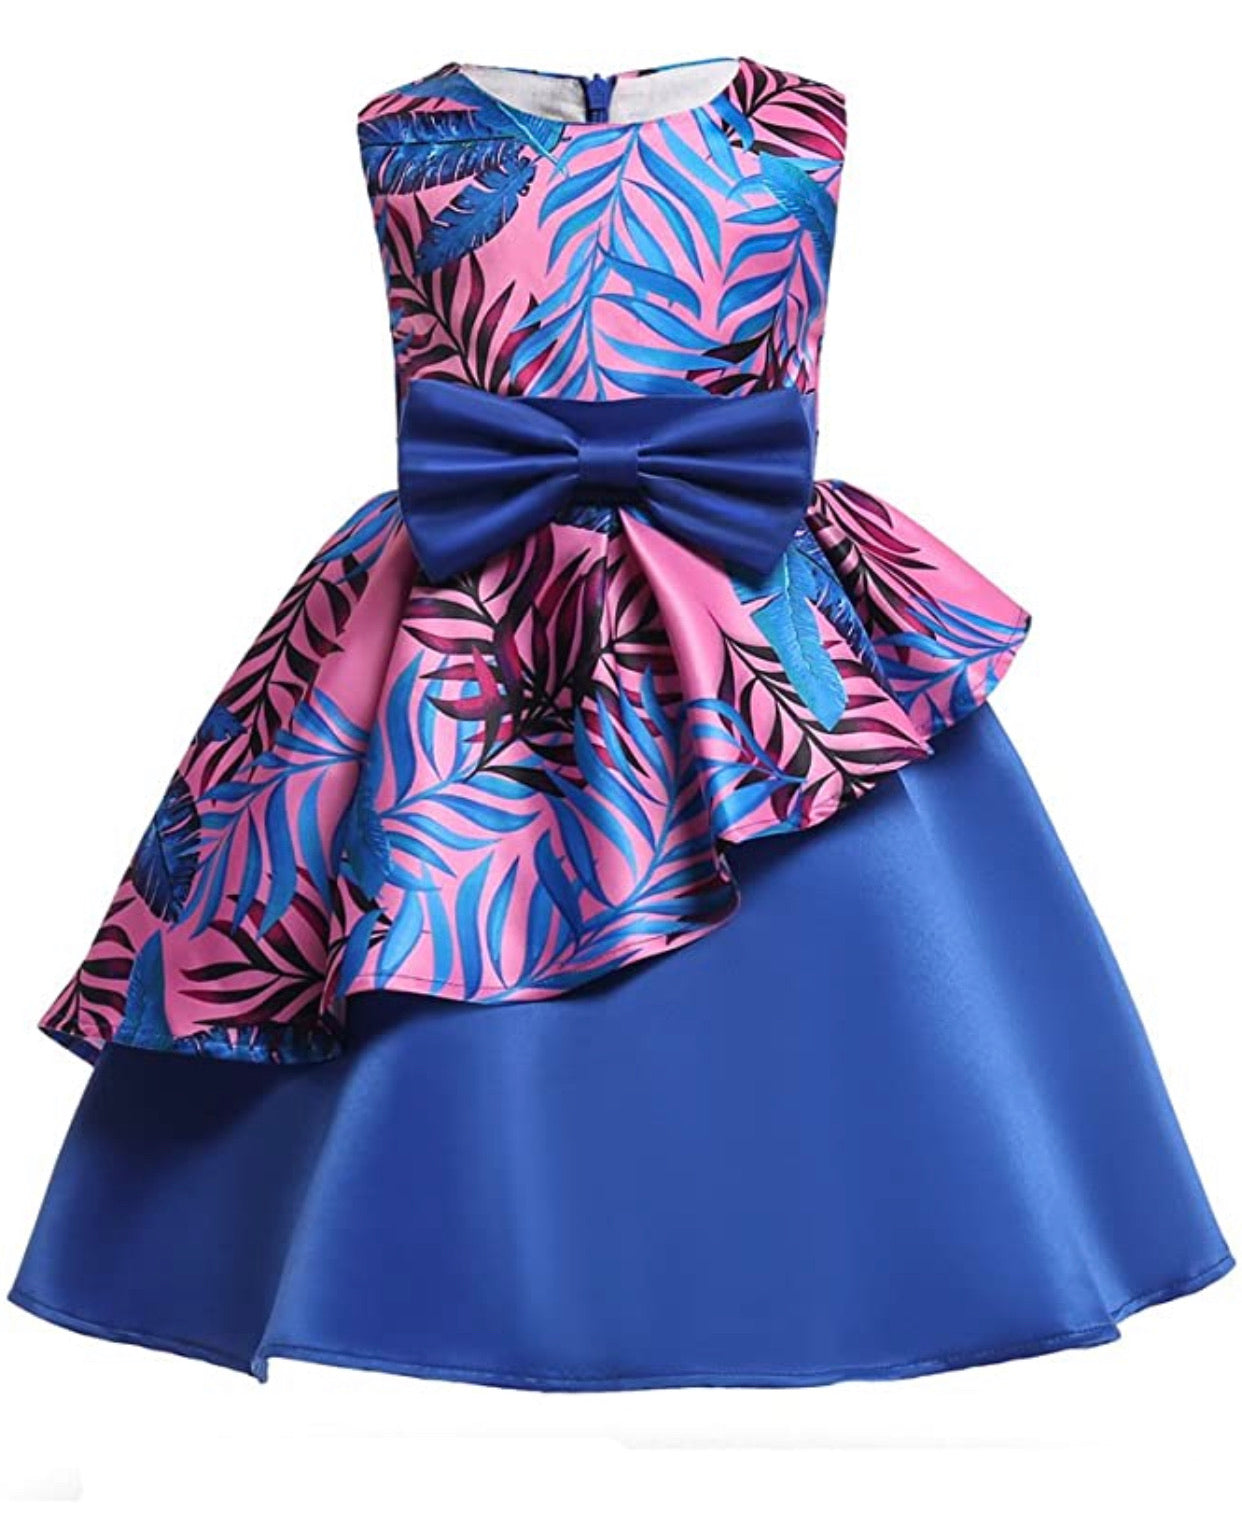 Little Girl’s Formal Floral Print Dress, Sizes 2T - 9 years (Navy Blue / Pink)